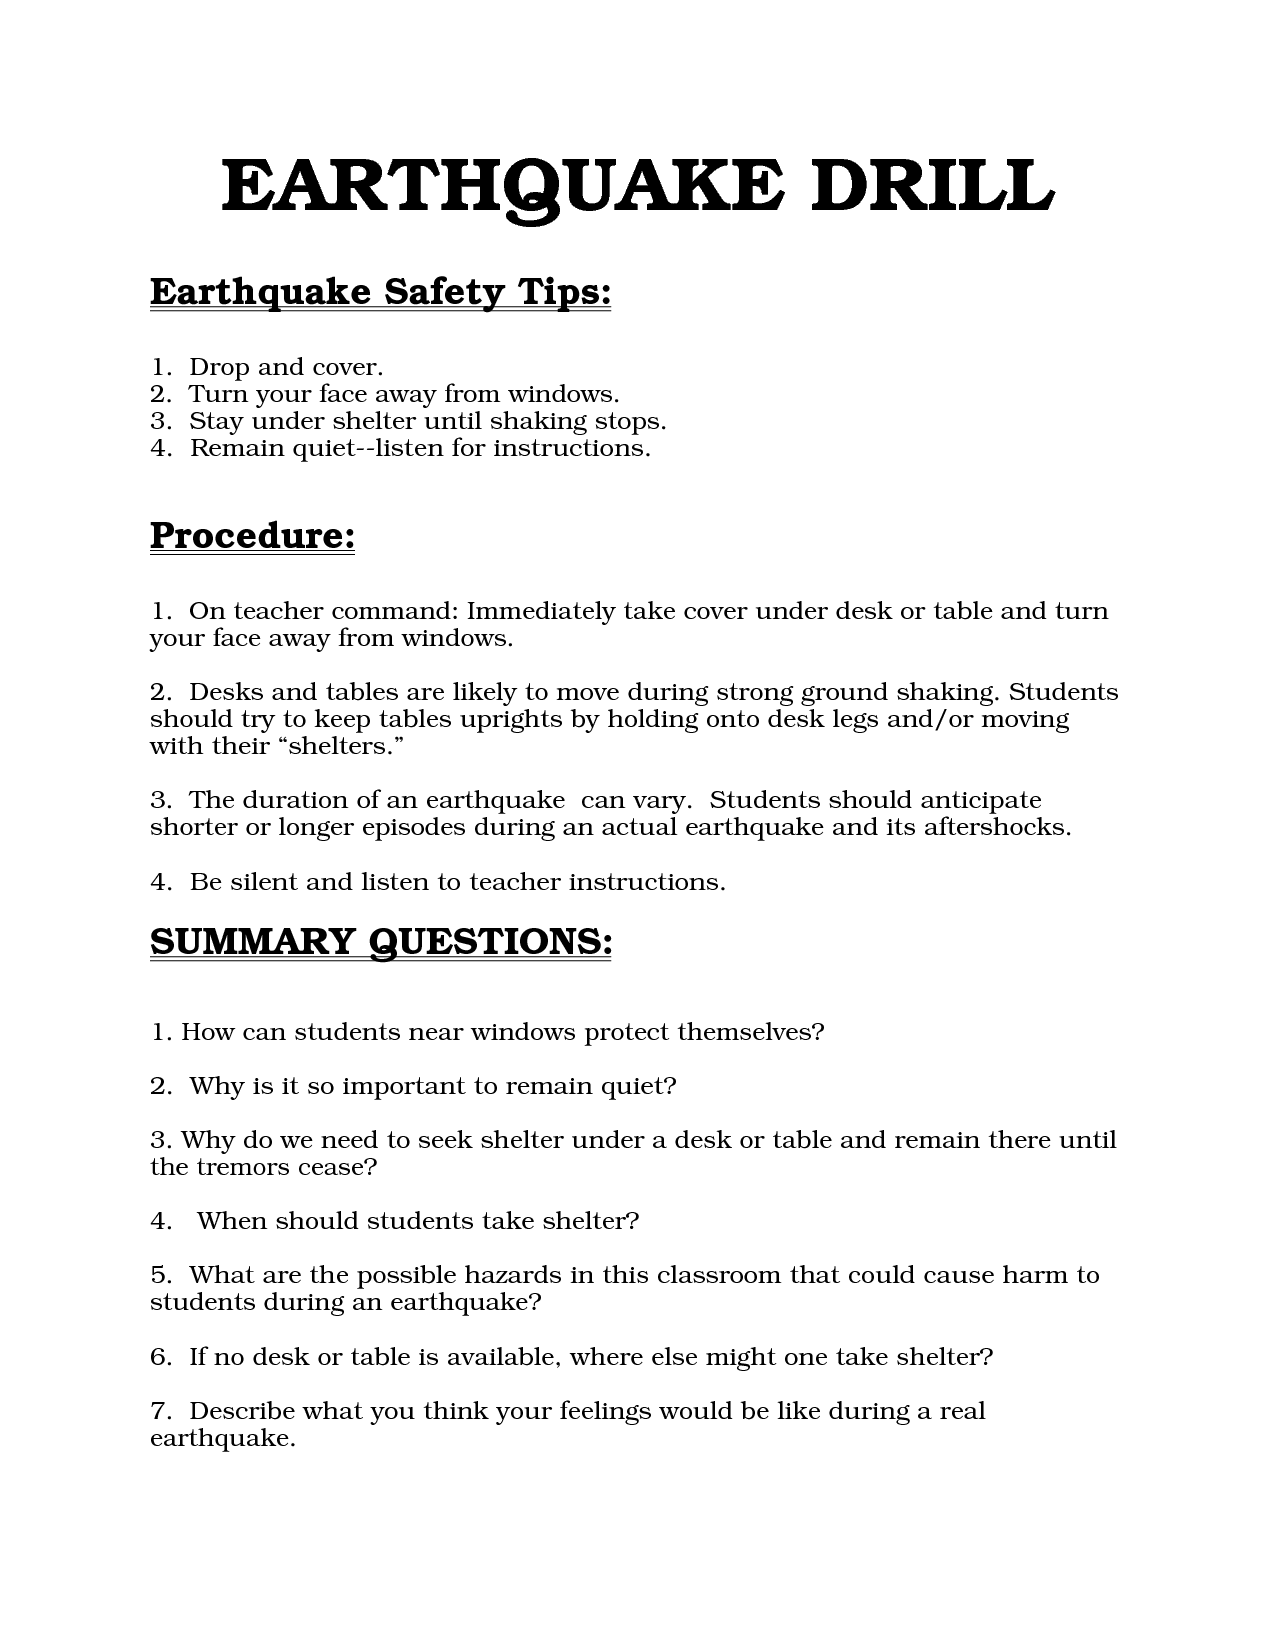 Earthquake Drill Education Quotes For Teachers Education Education Motivation